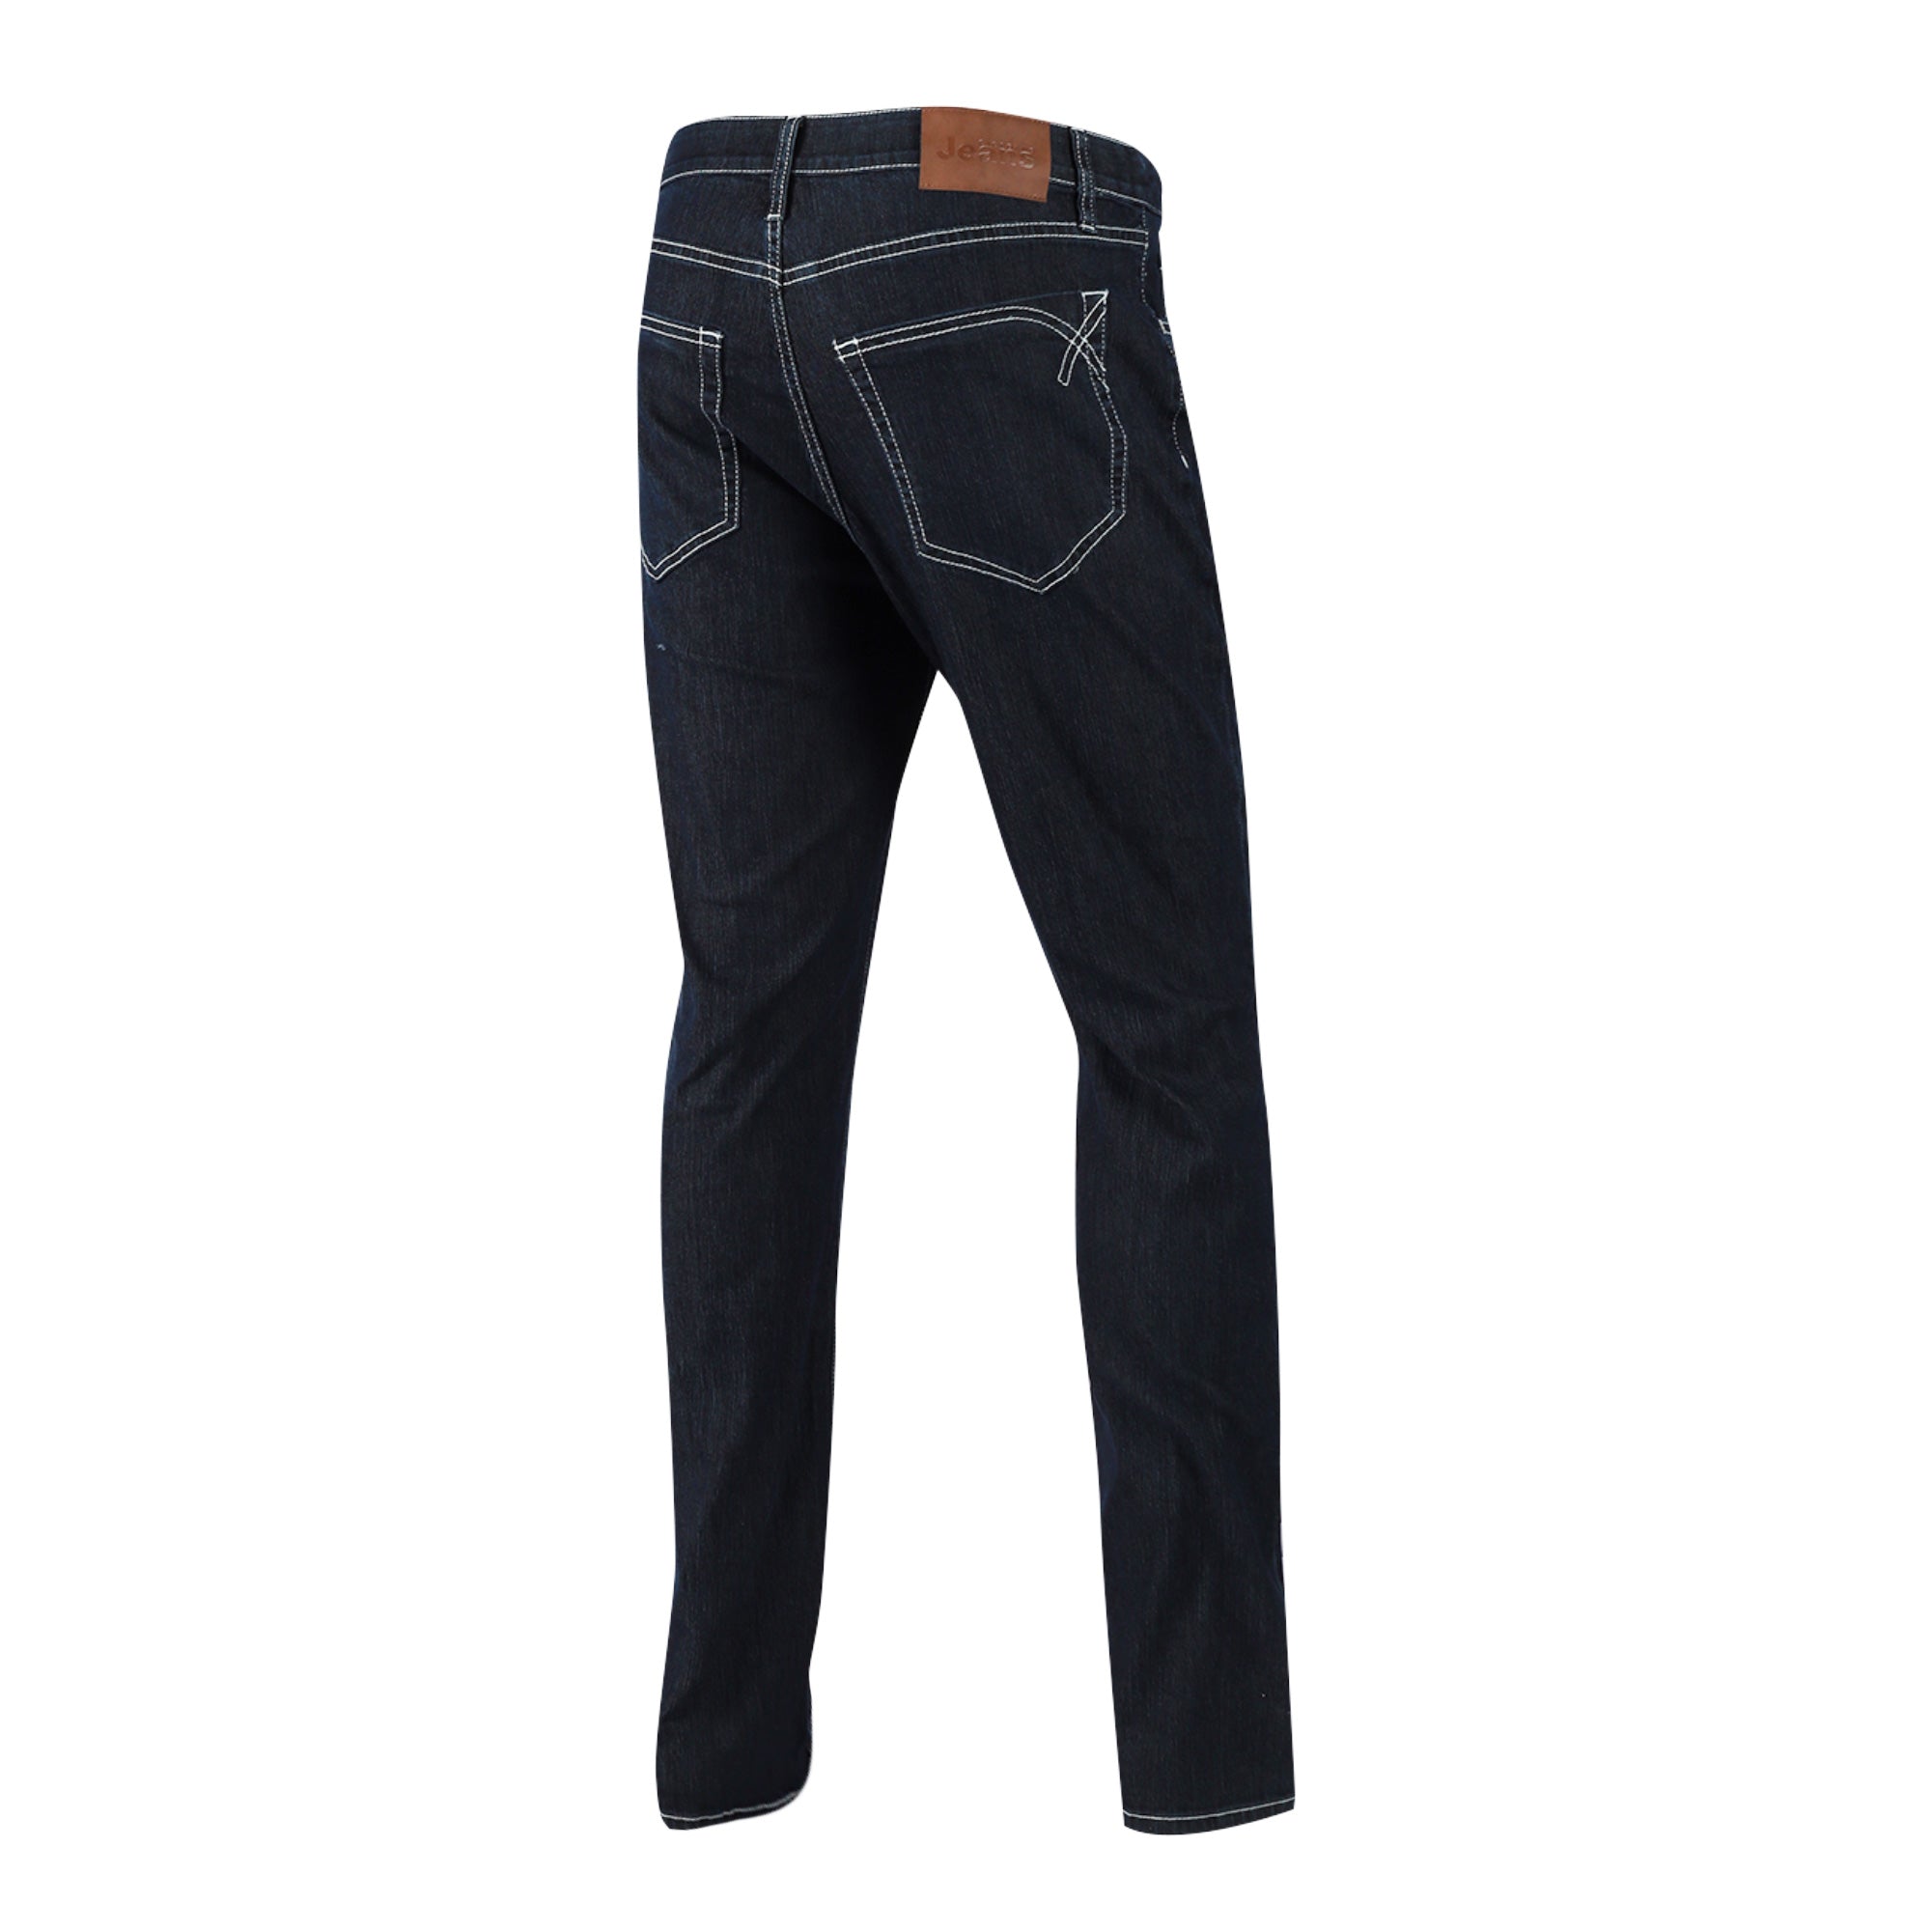 Men's Low Rise Slim Tapered Jean Pants (180° Expandable Waistband)